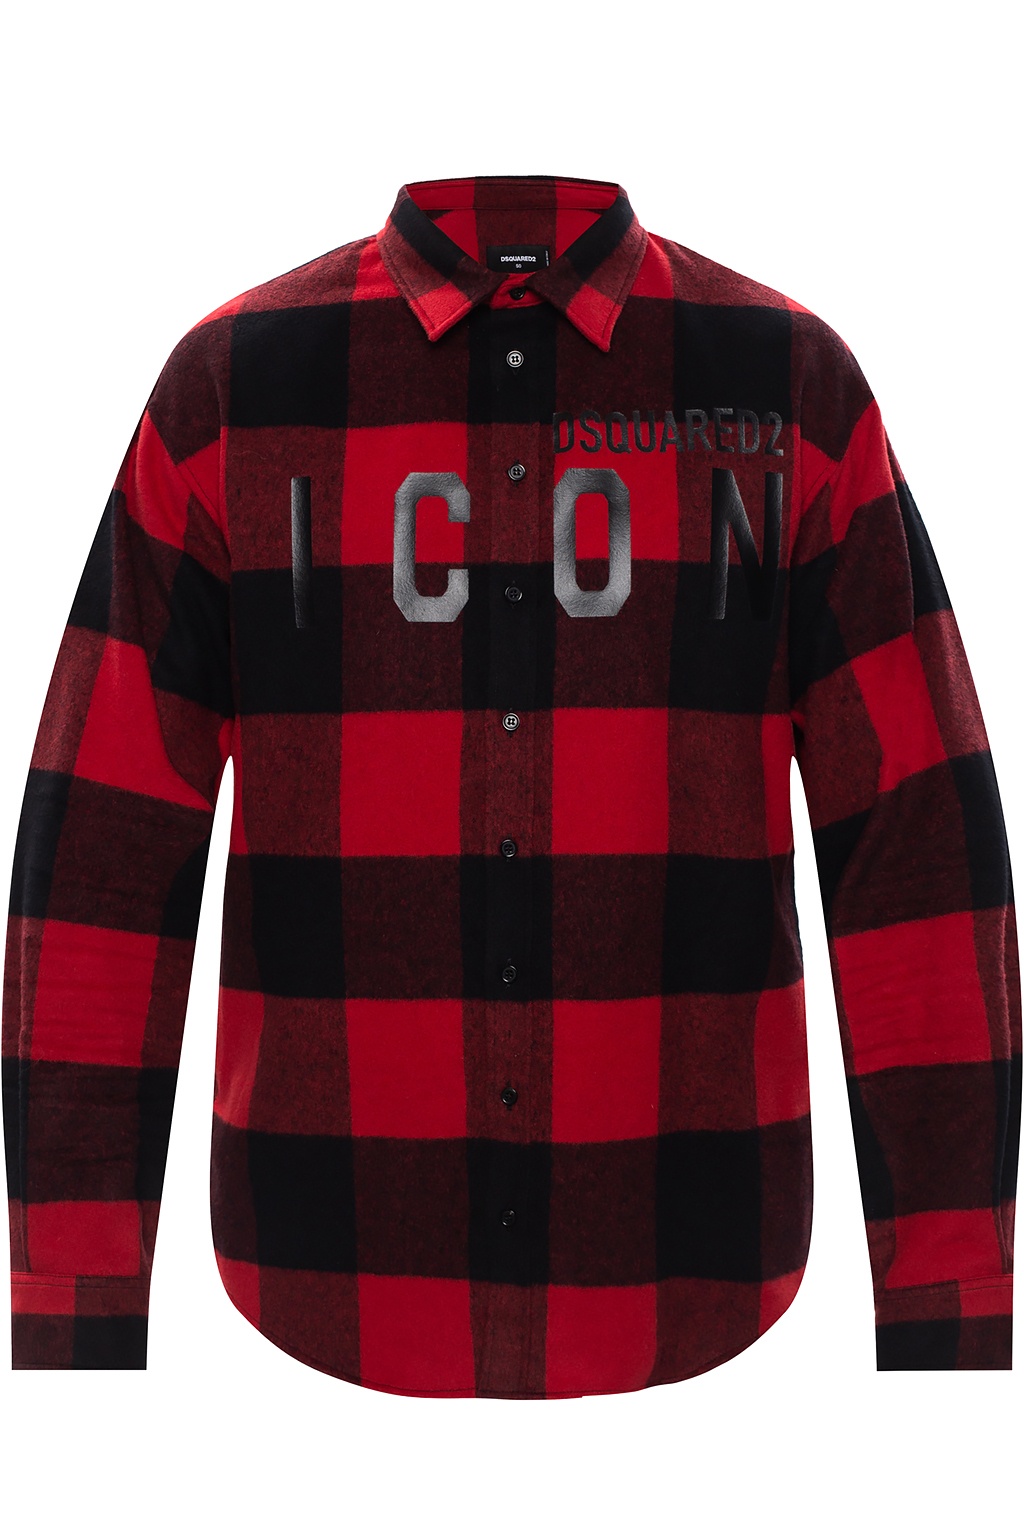 dsquared2 shirt red